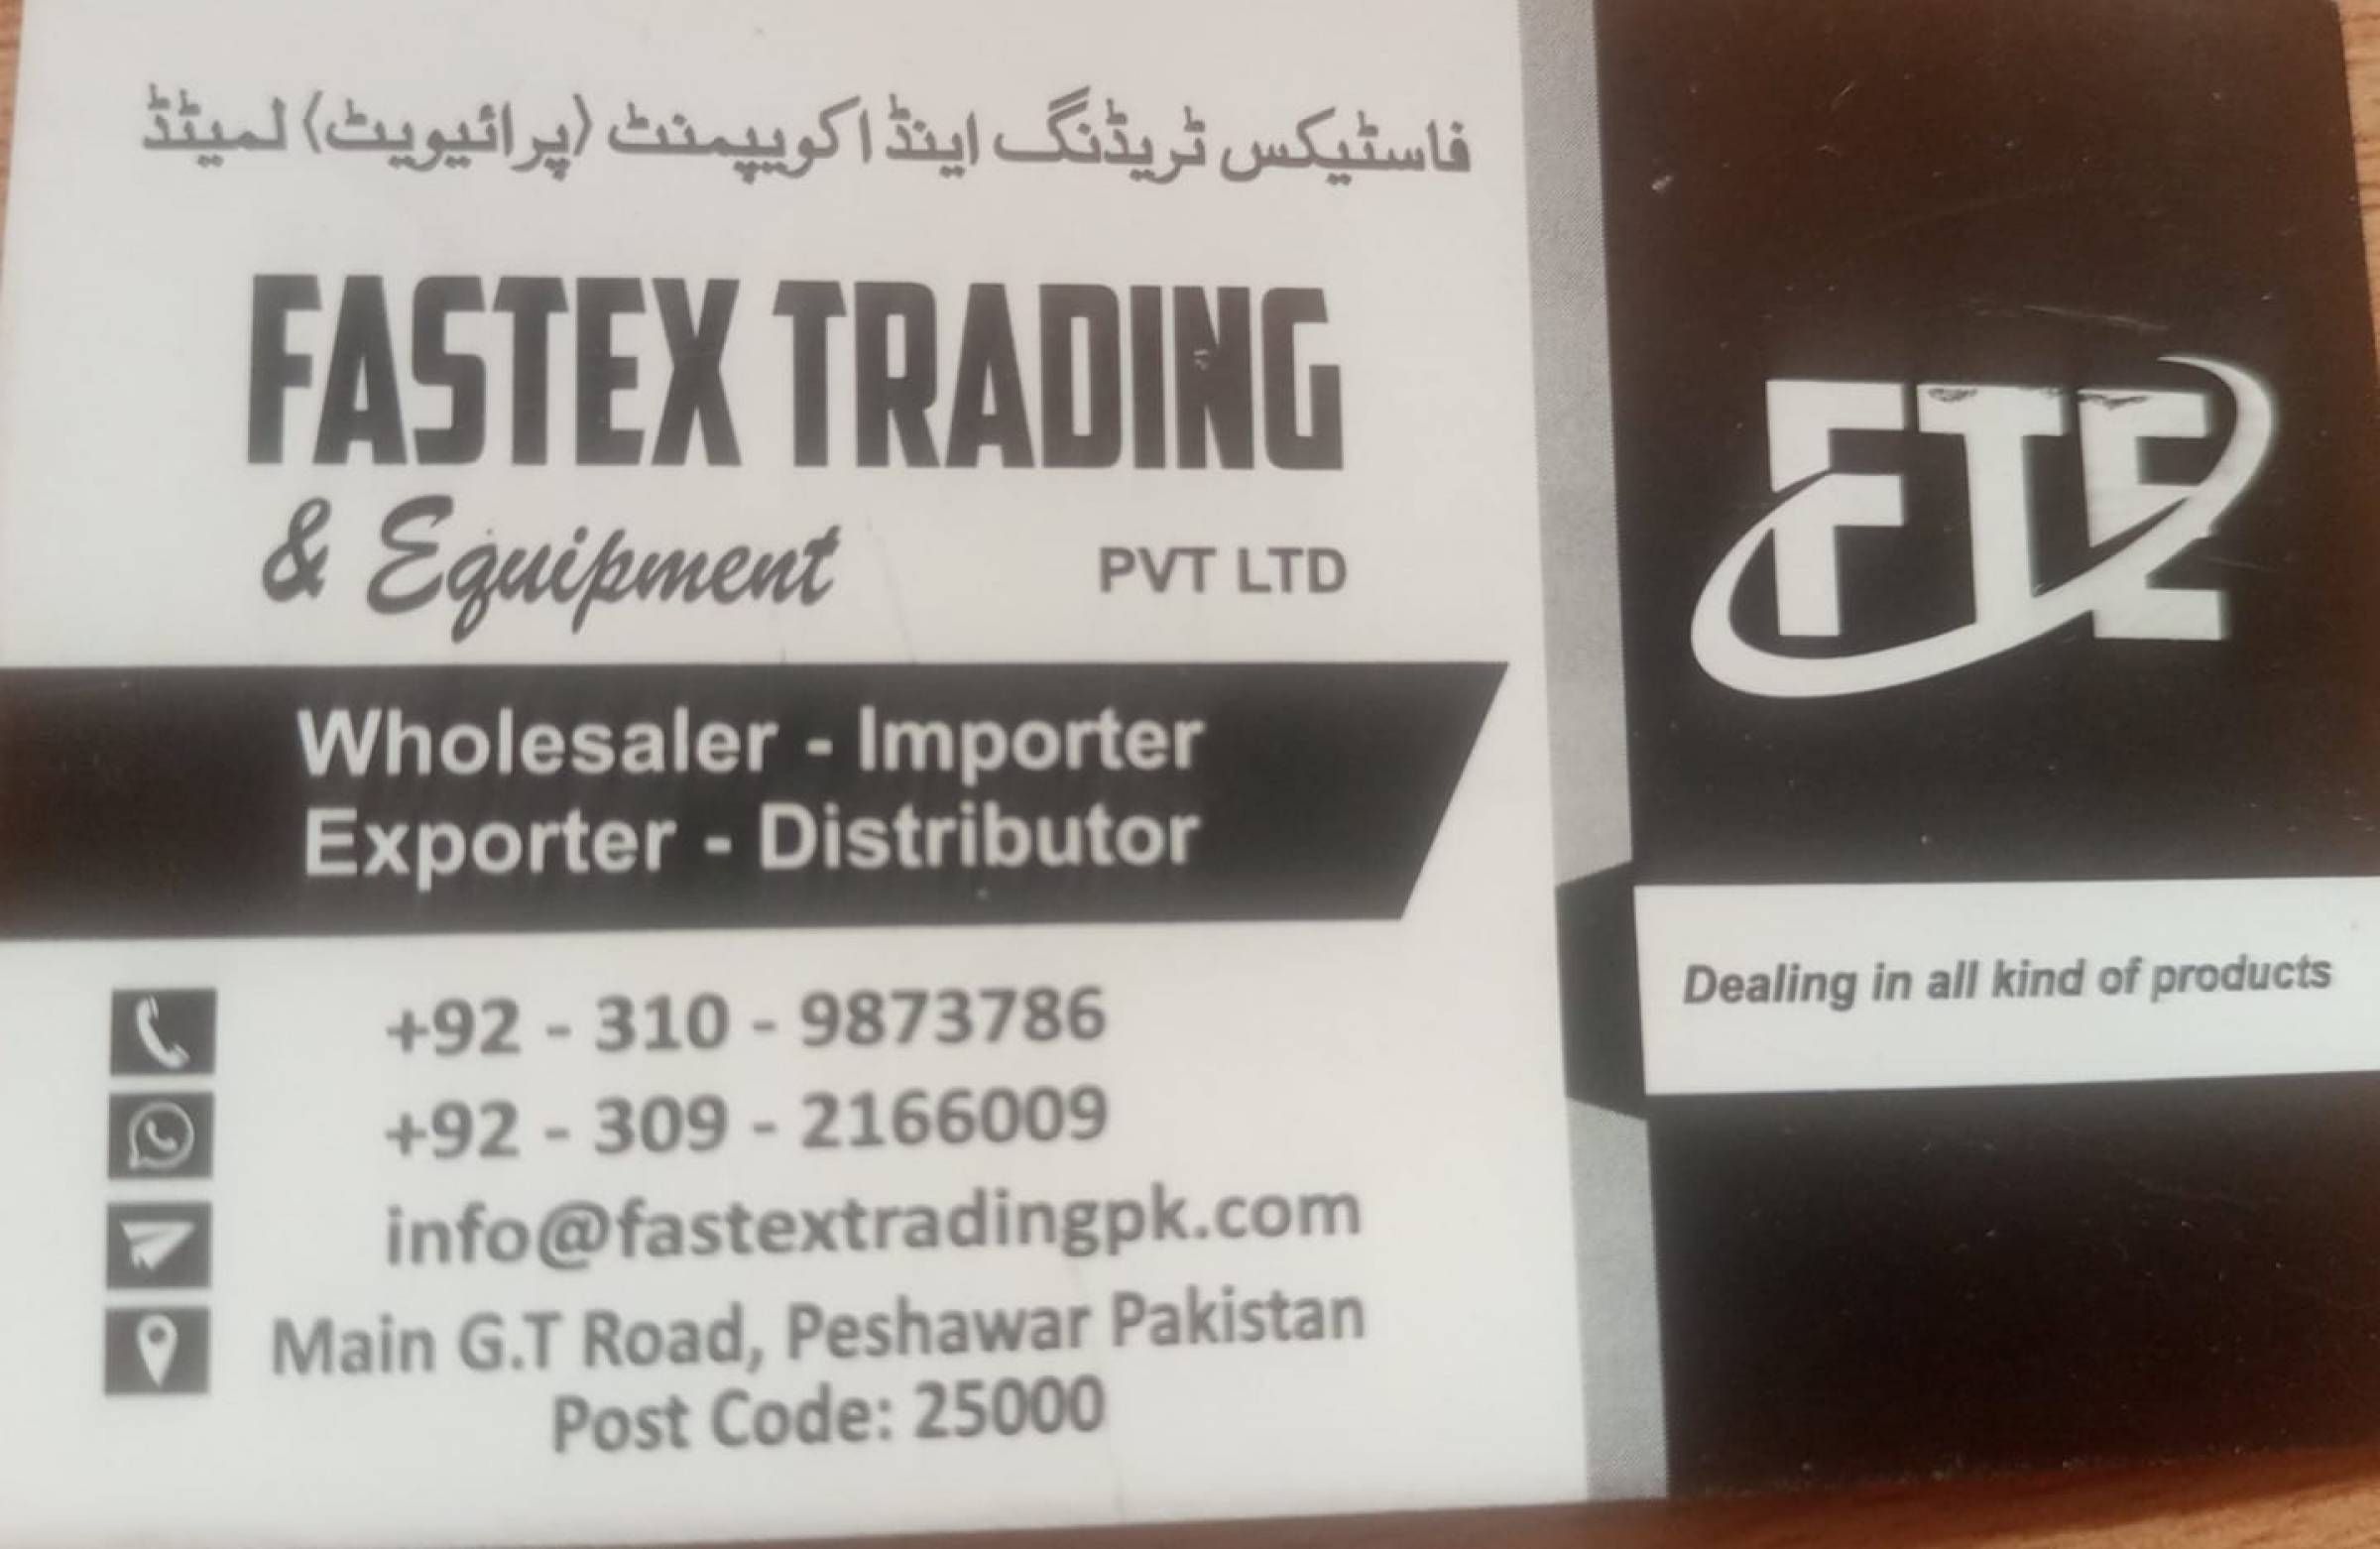 FASTEX TRADING & EQUIPMENT PRIVATE LIMITED